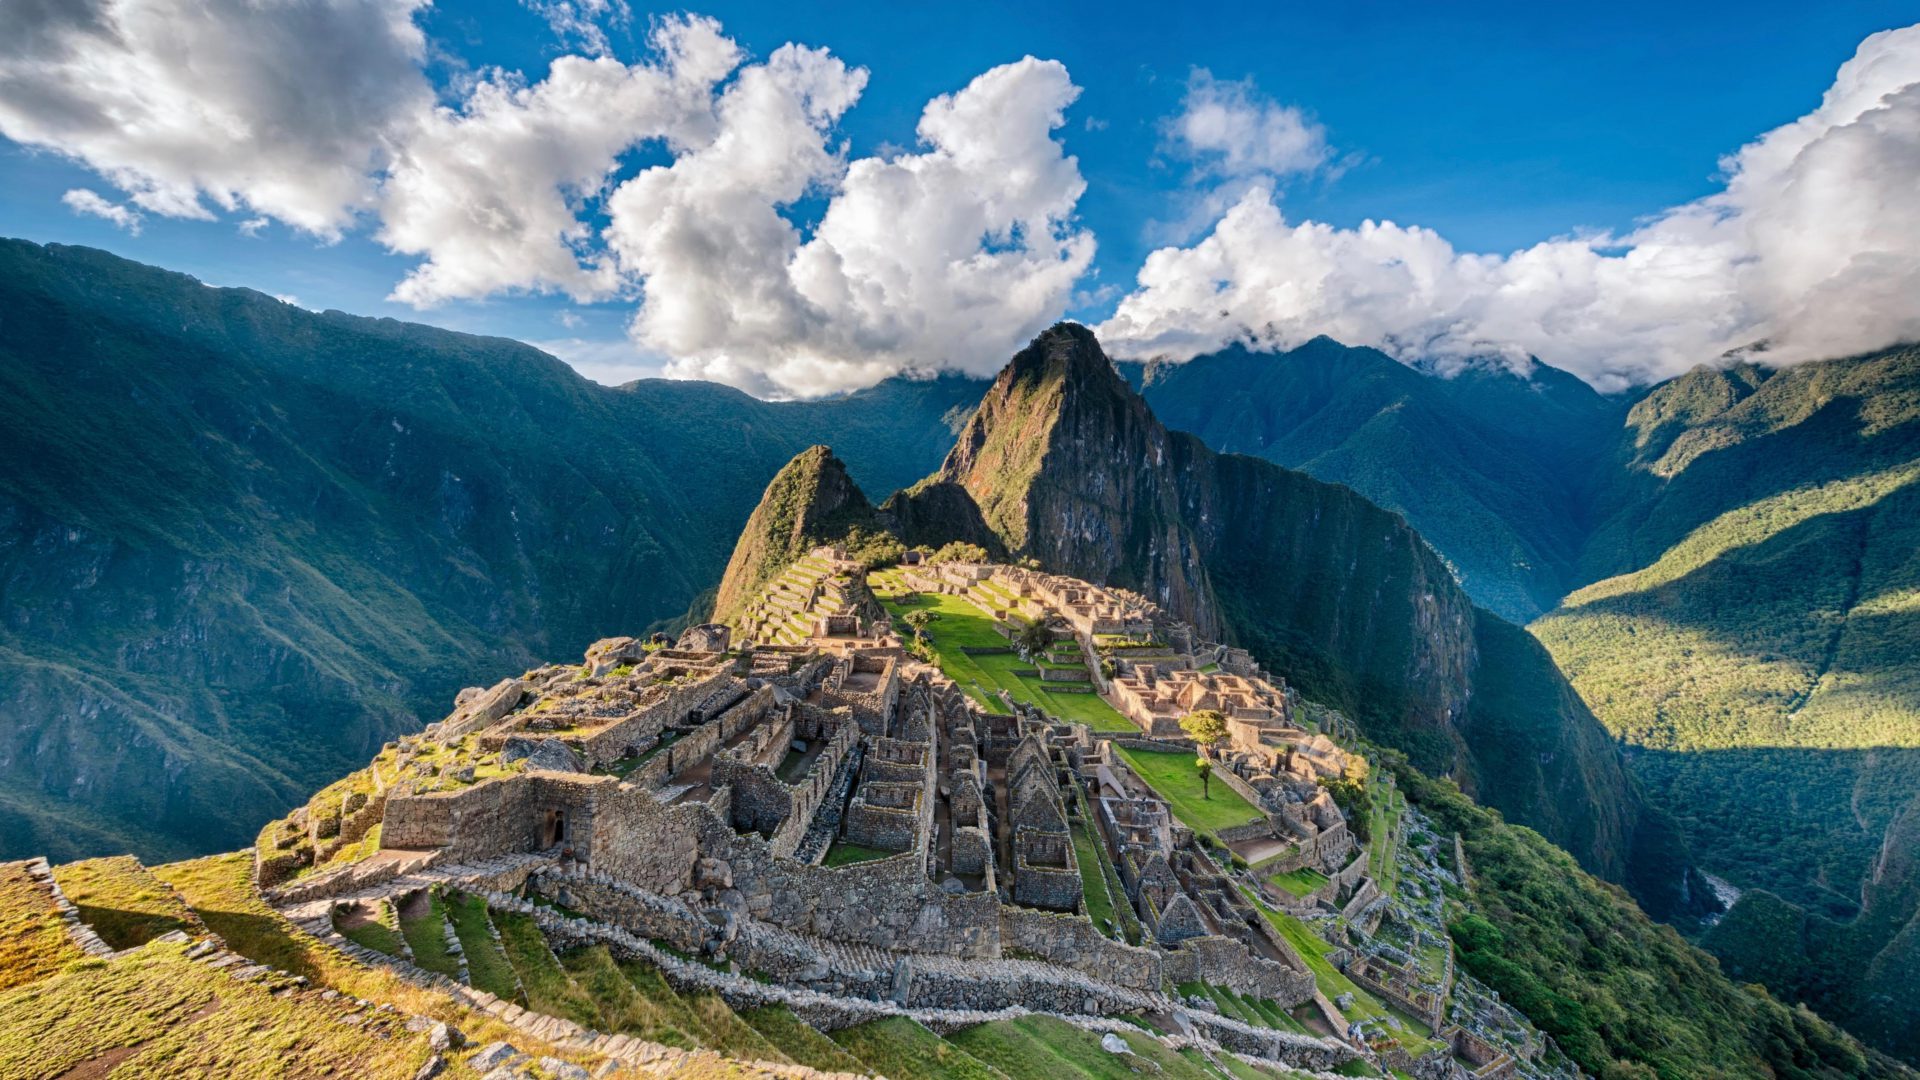 A view facing Machu Pichu in the Peruvian Andes with a blue sky and pearly white clouds